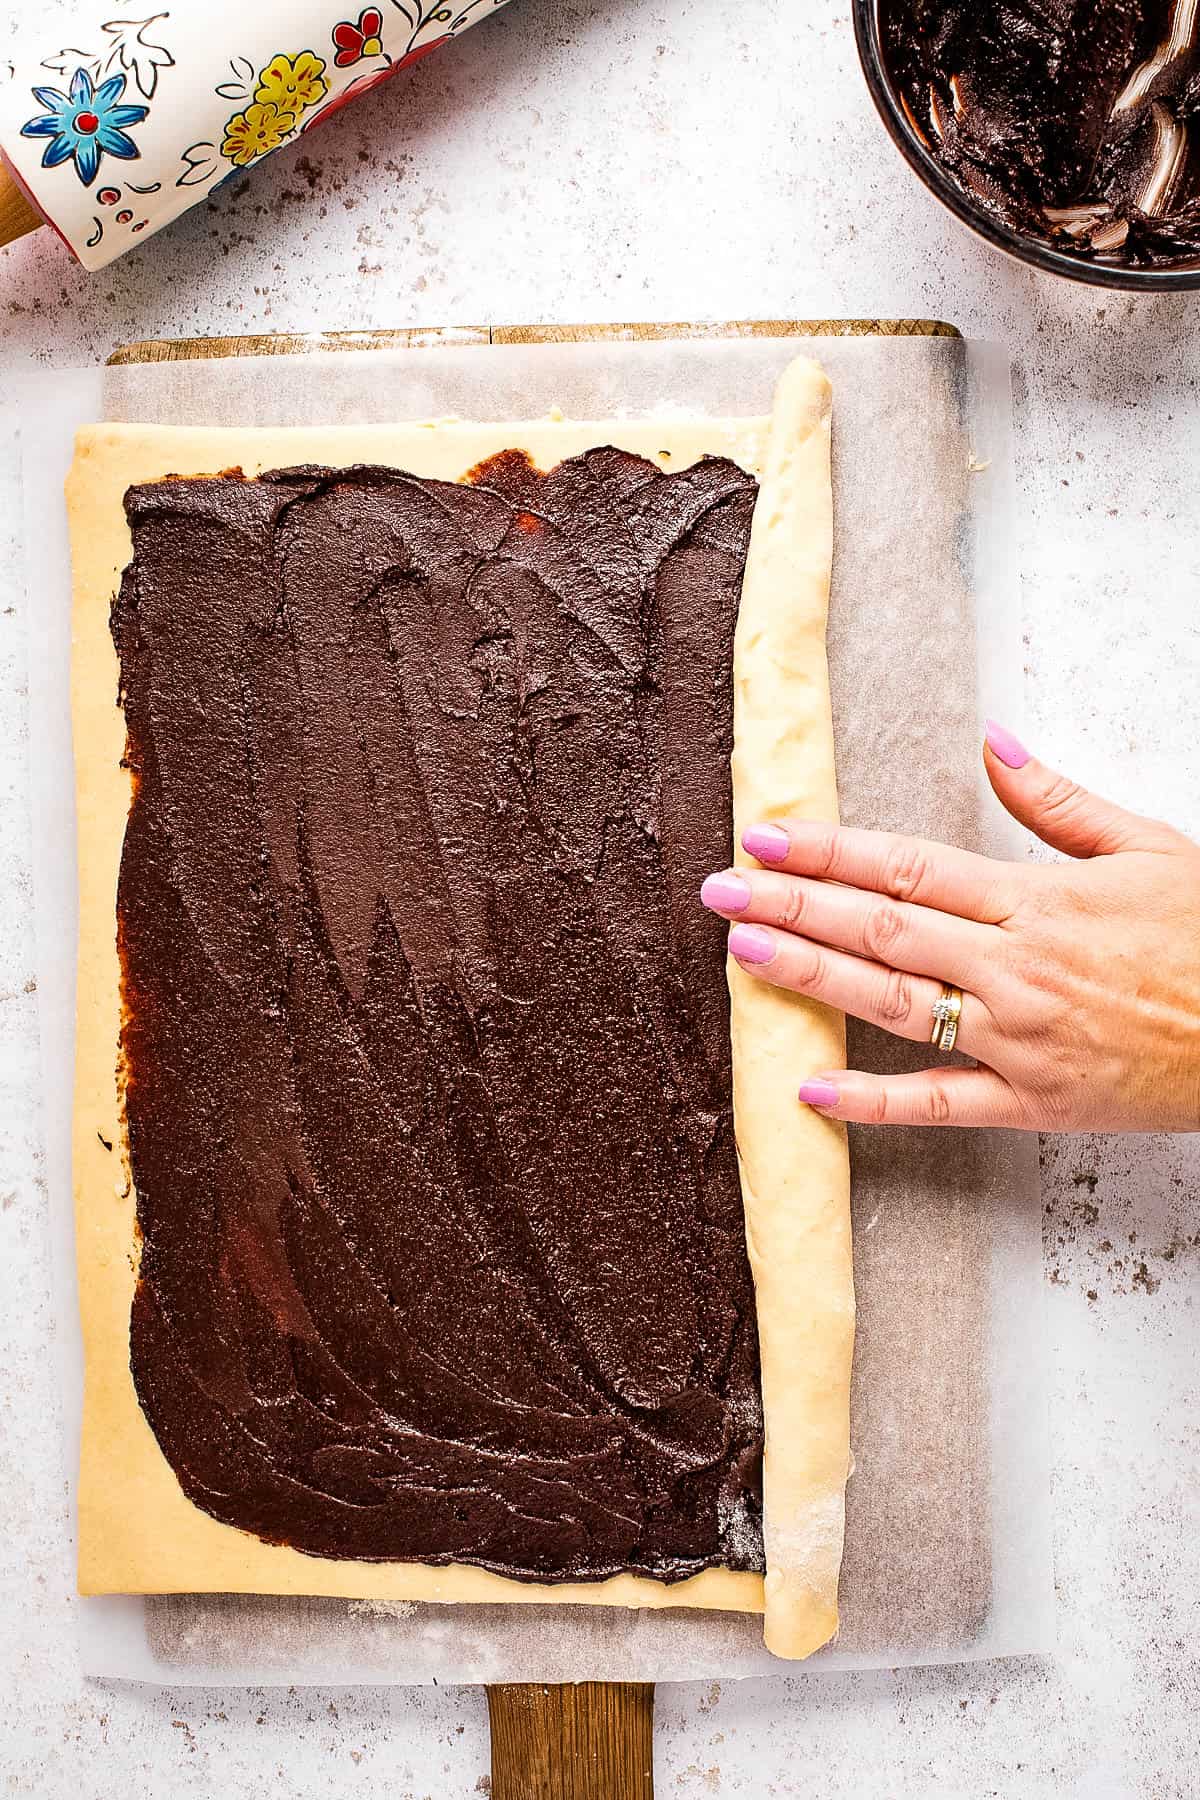 A person spreading chocolate frosting on a chocolate babka.